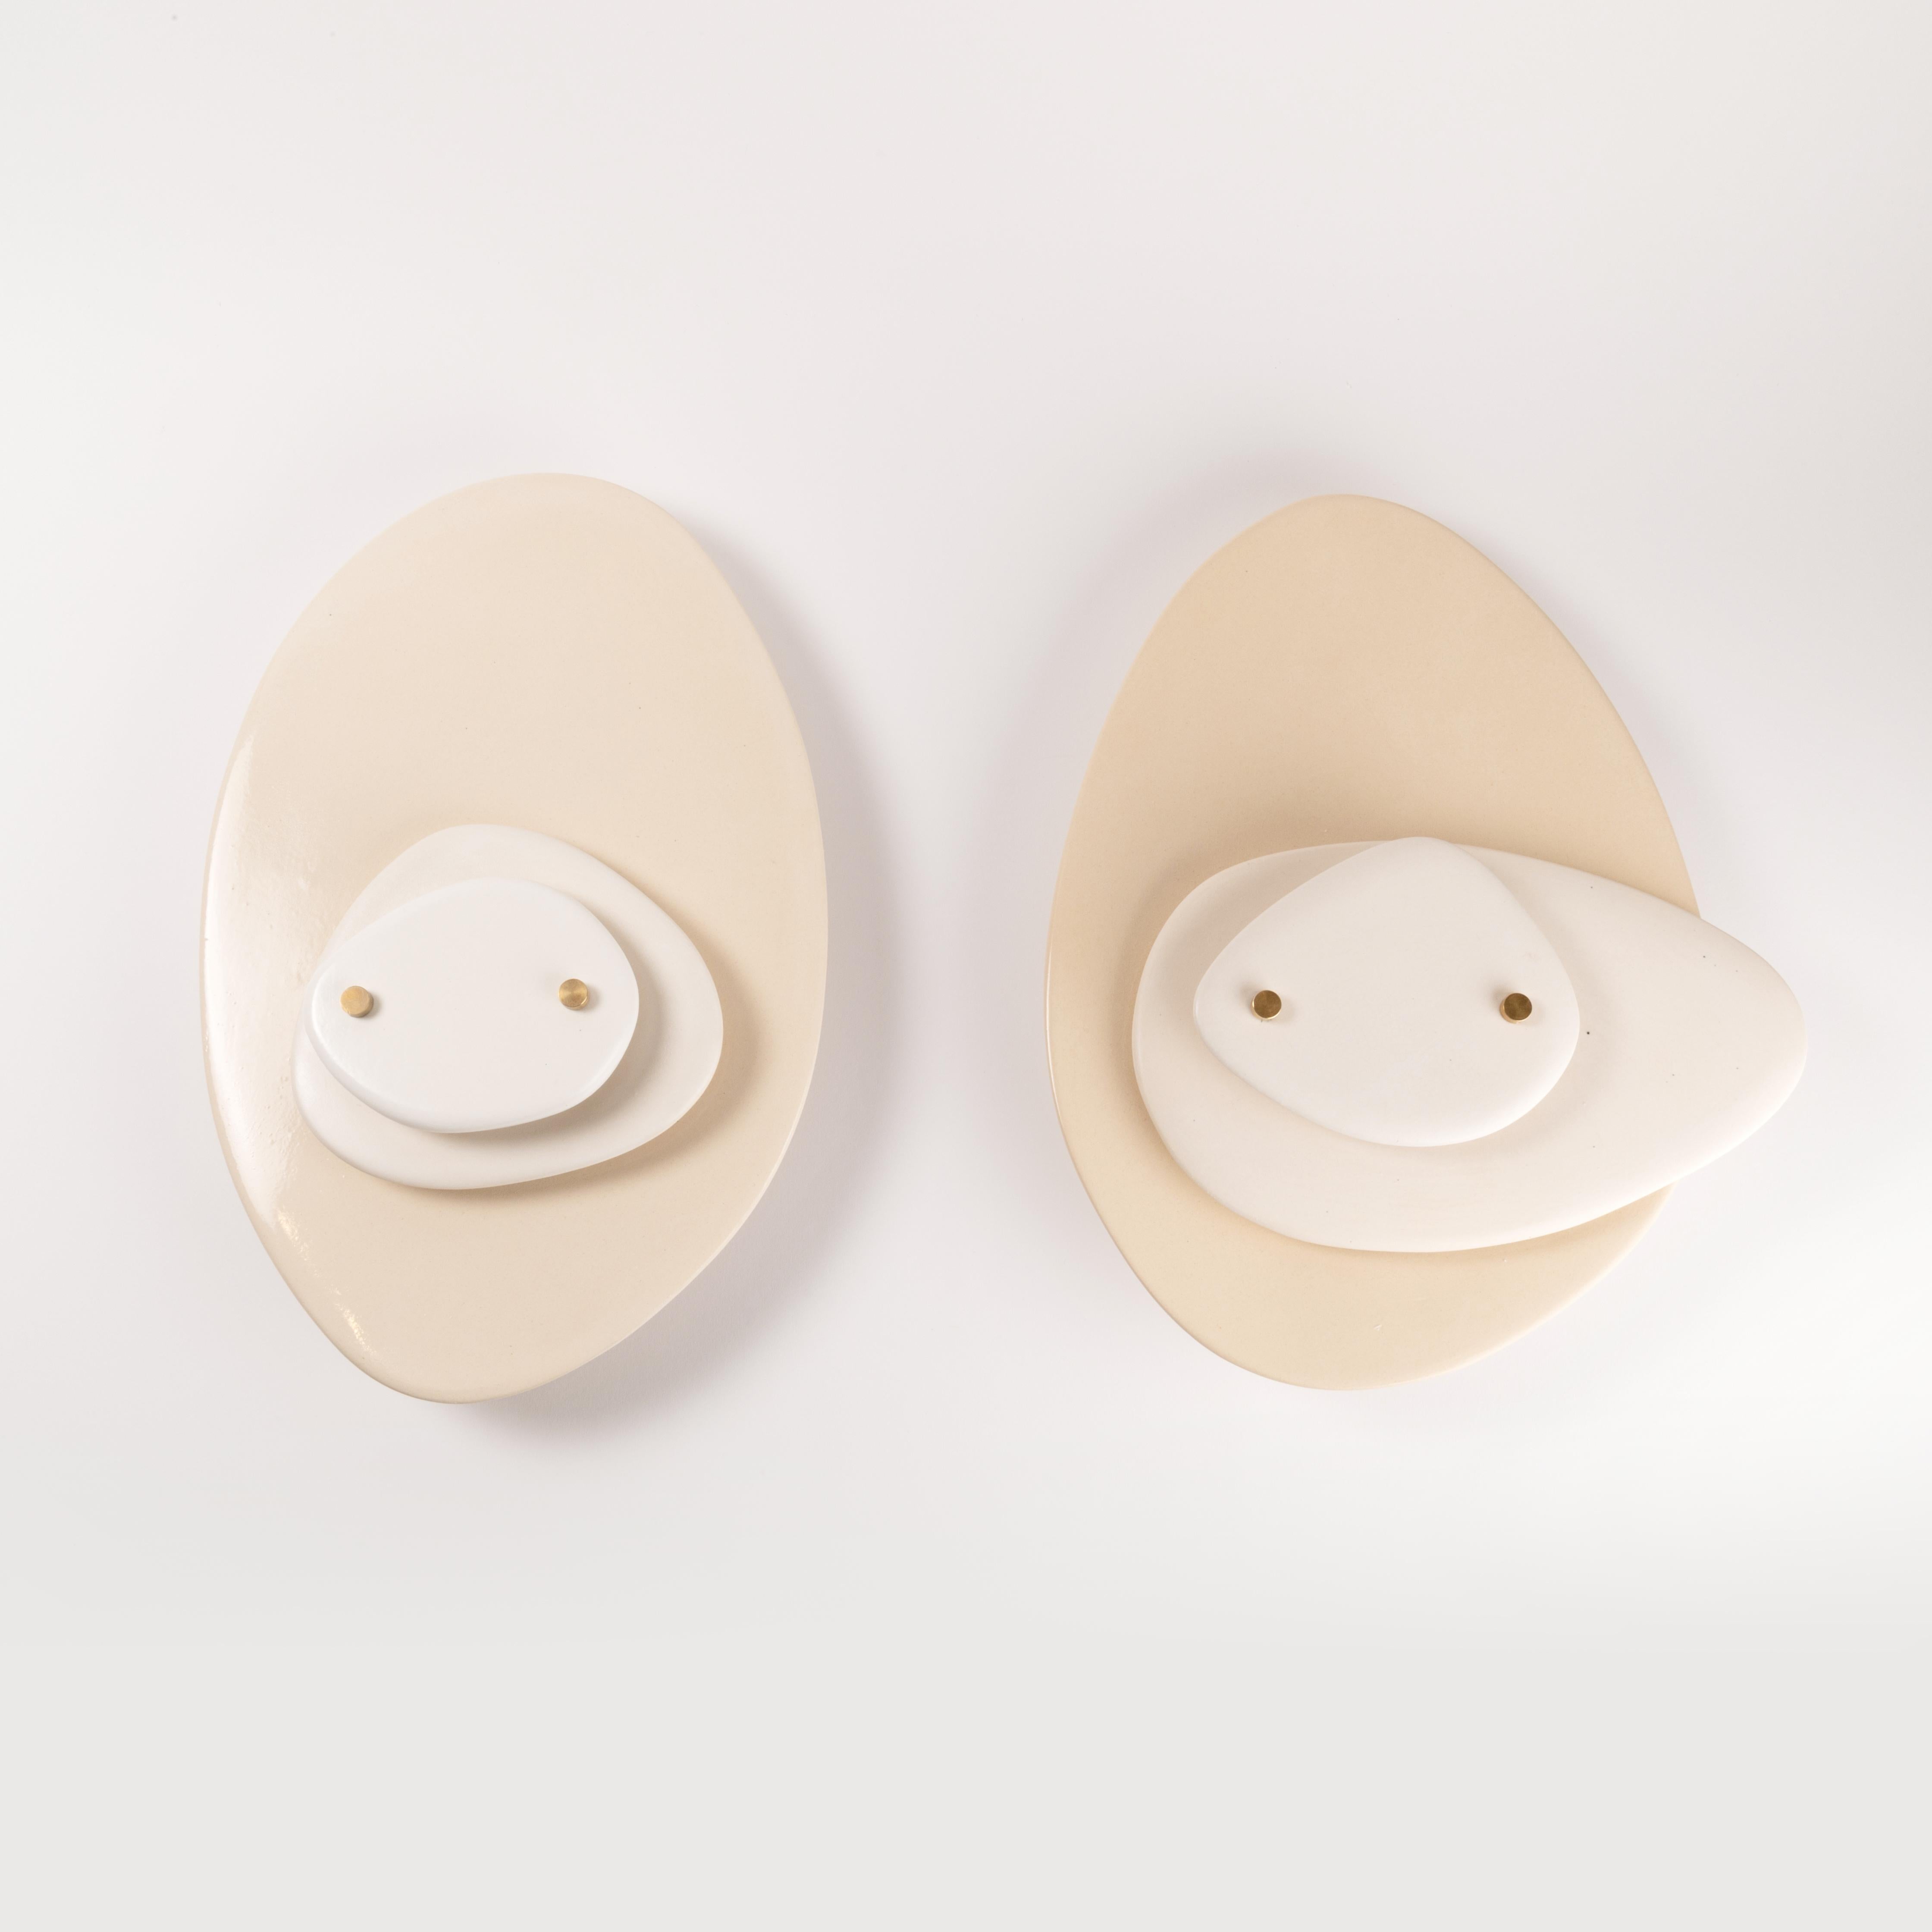 Set of 2 disk wall sconces by Elsa Foulon
Dimensions: D 34 x H 25 cm 
Materials: Ceramic, brass
Unique Piece

All our lamps can be wired according to each country. If sold to the USA it will be wired for the USA for instance.

Elsa Foulon,